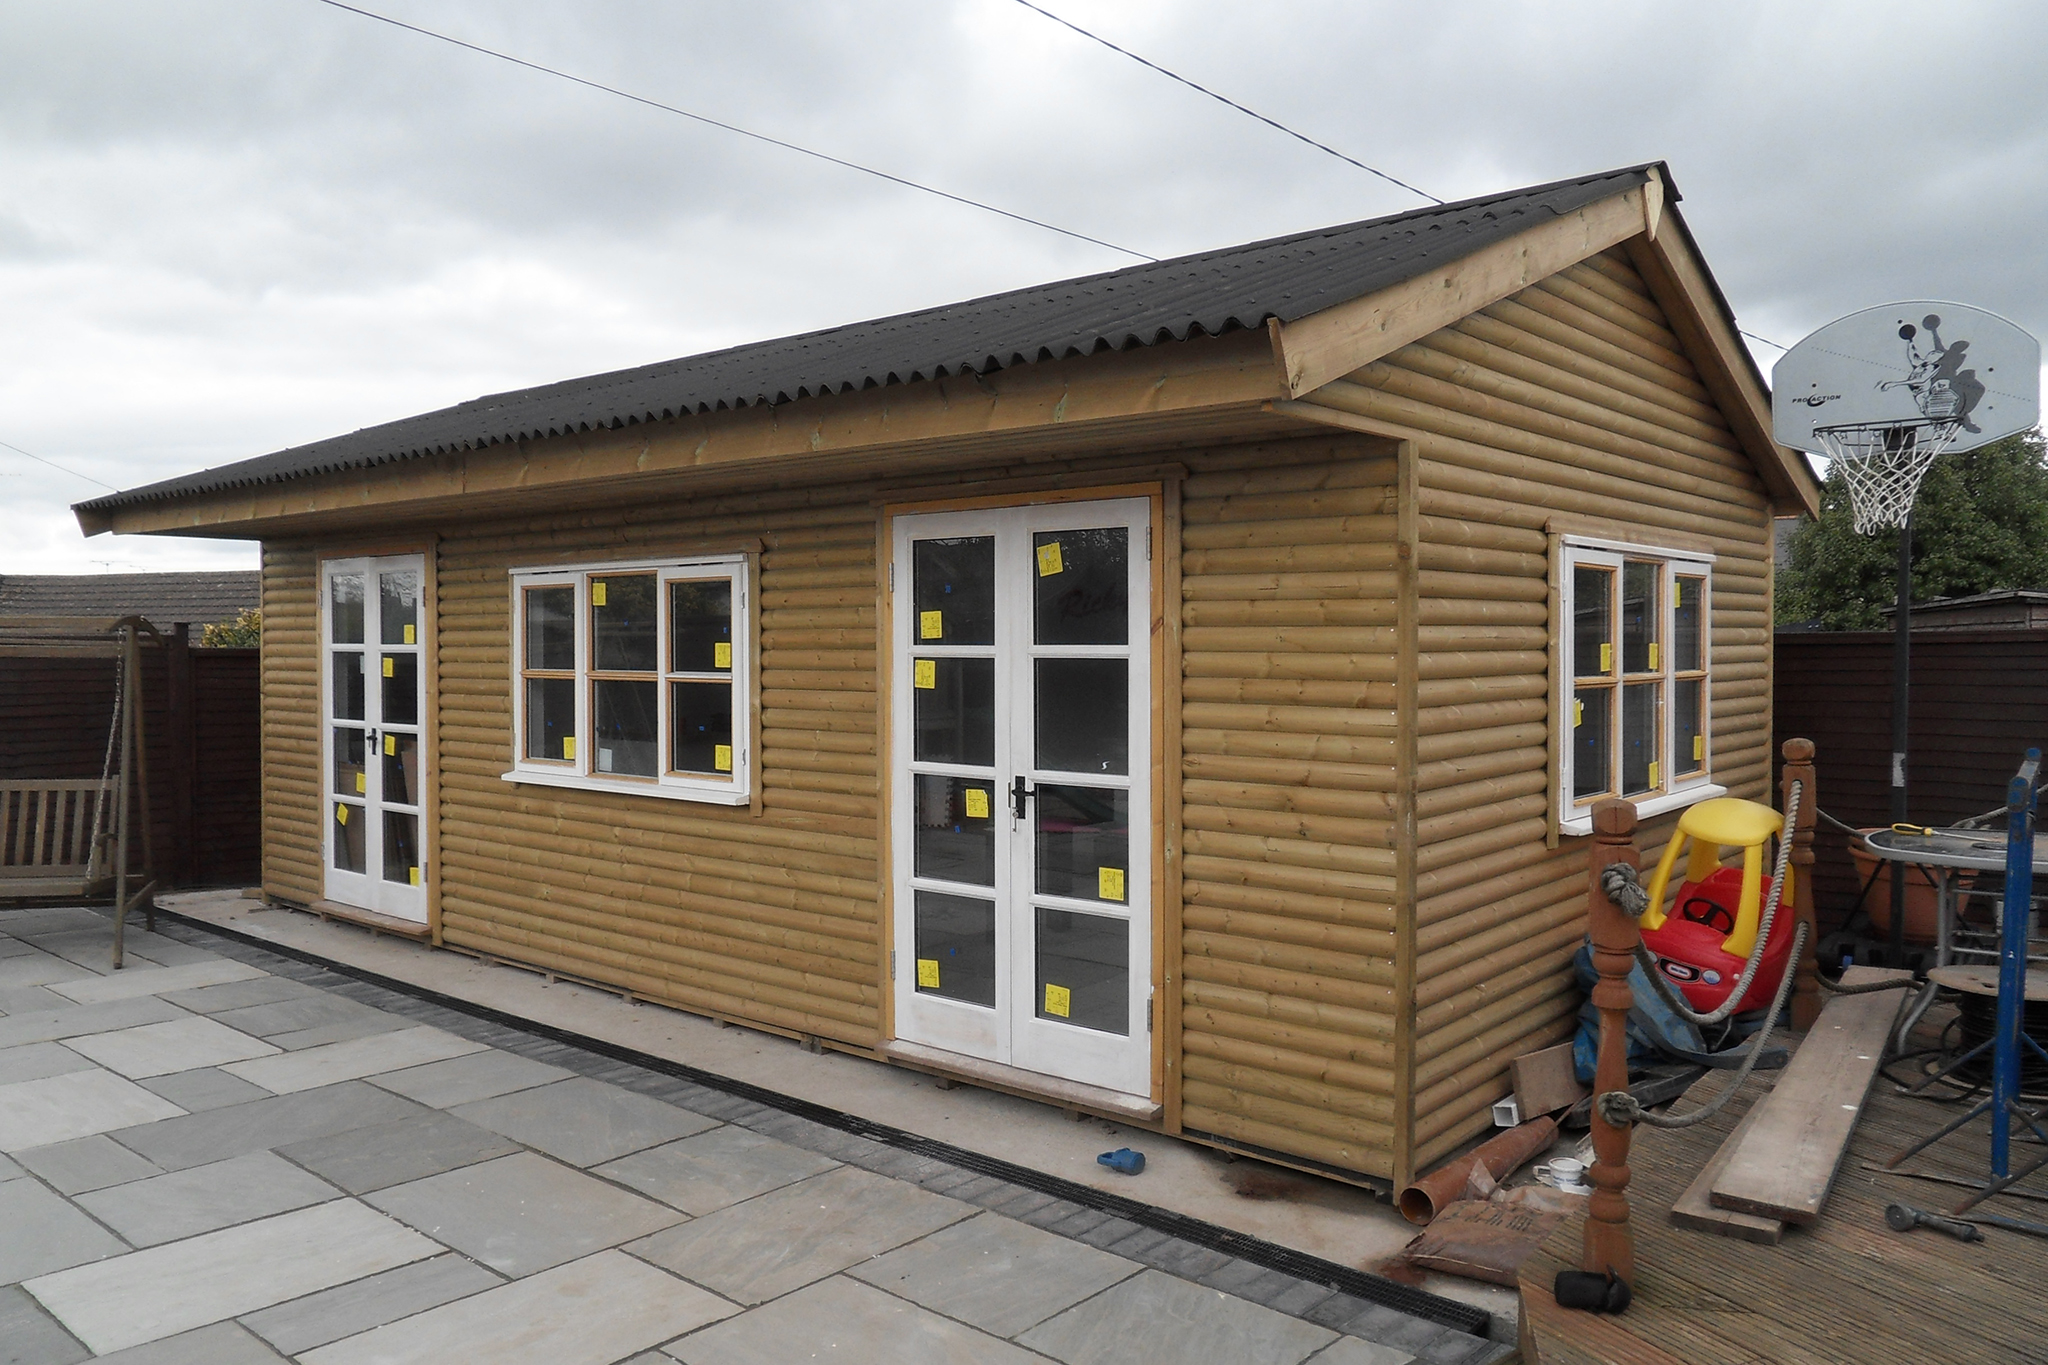 Log lap clad Office, with PVC windows and doors, topped with a Black corrugated Onduline Roof - Harris Timber Products